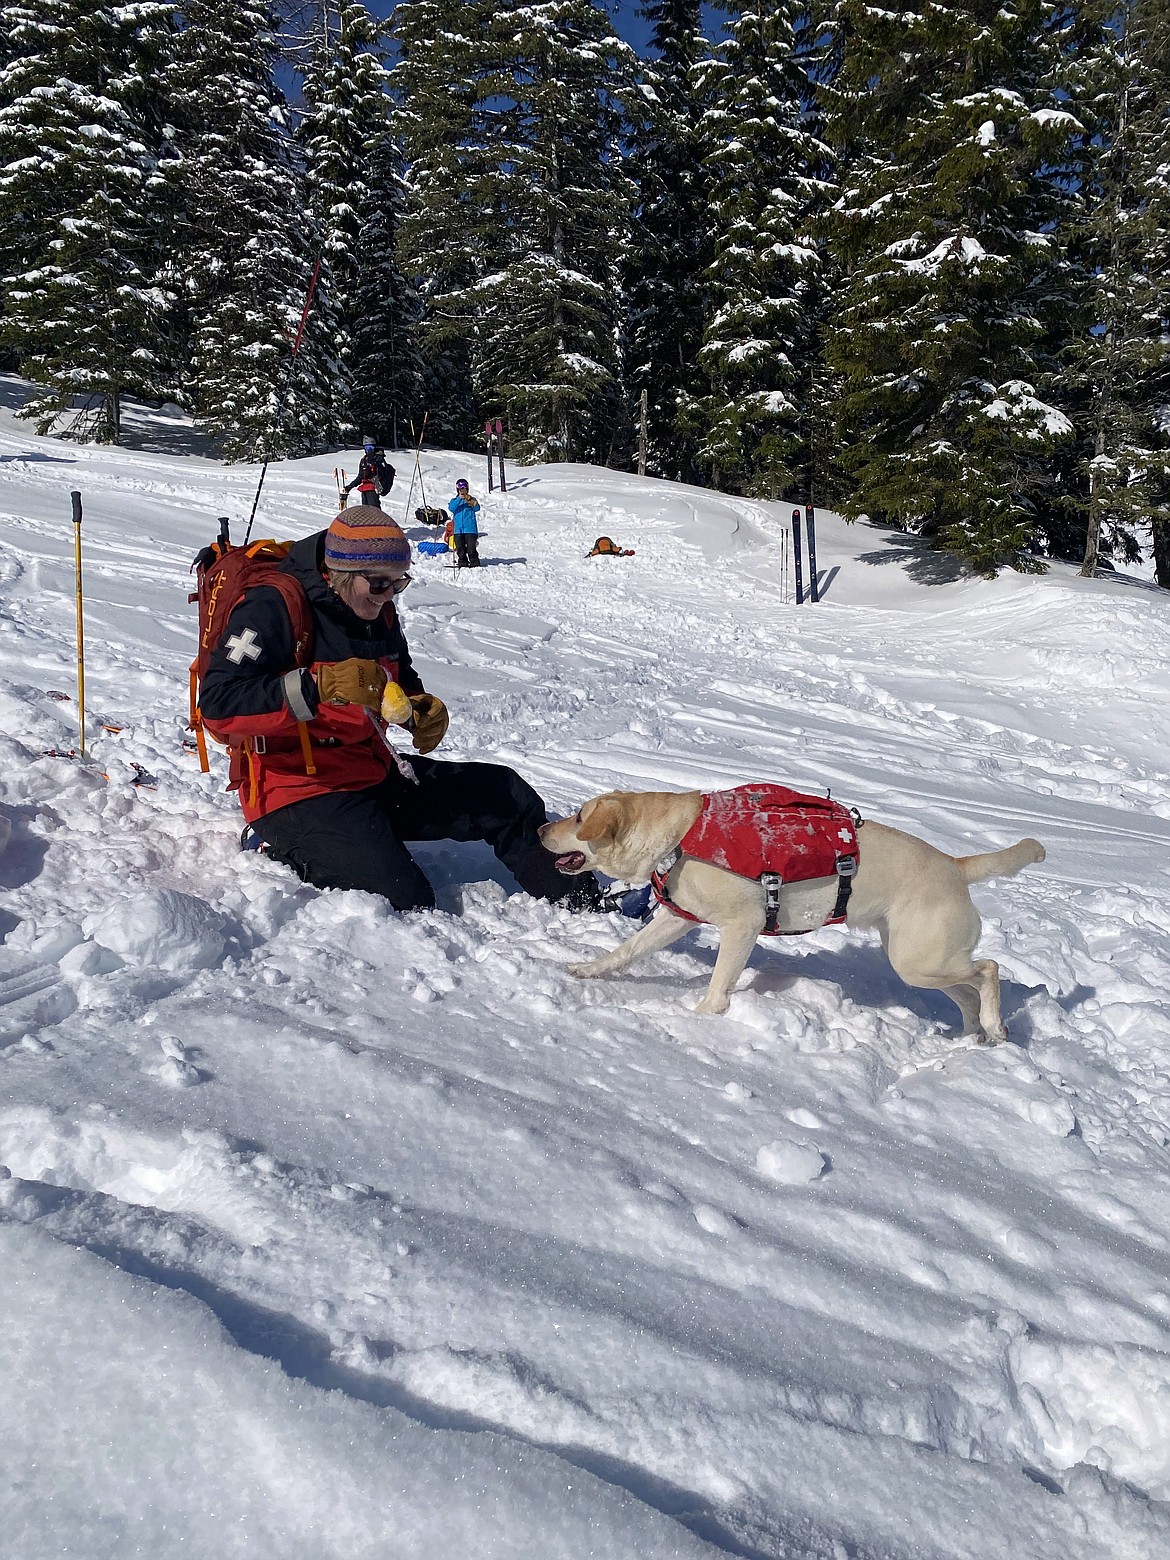 One of Schweitzer avalanche rescue dogs goes through some training recently. A fundraiser is planned for Wednesday, March 29, at Burger Express to raise money for an emergency veterinary bill fund for Annie, who suffered a heart attack on March 11, and the other rescue dogs.